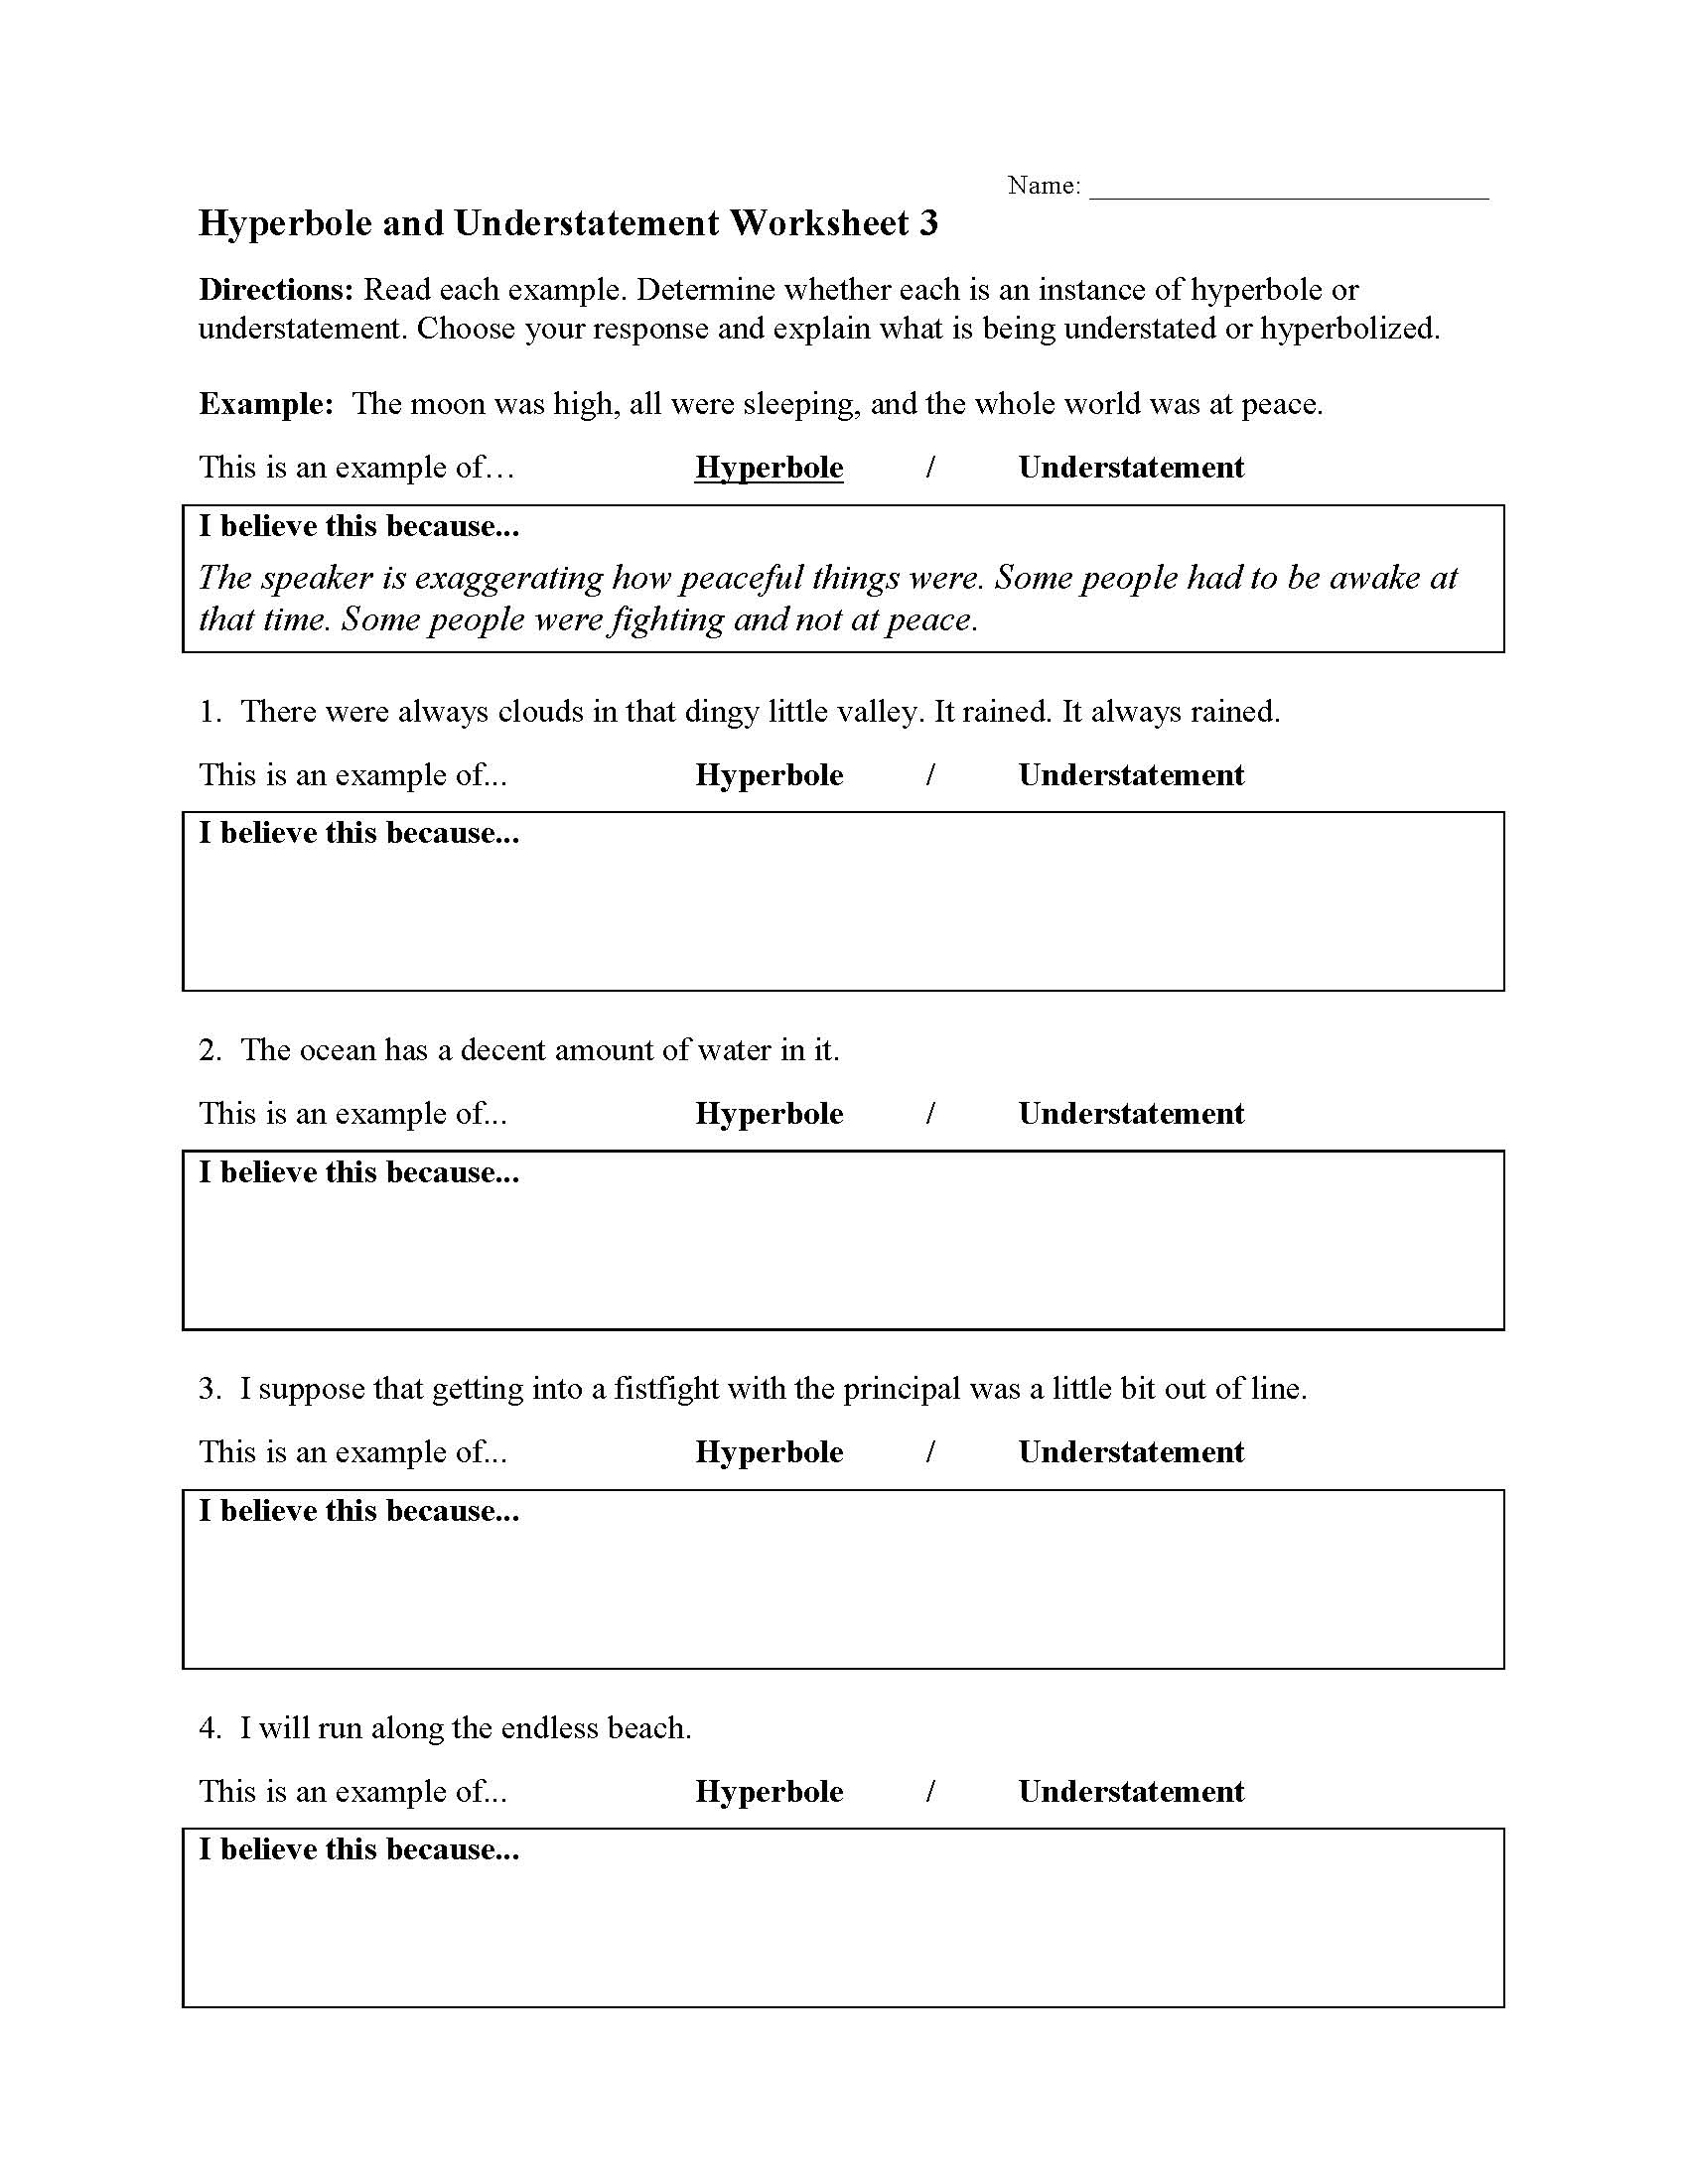 This is a preview image of Hyperbole and Understatement Worksheet 3. Click on it to enlarge it or view the source file.